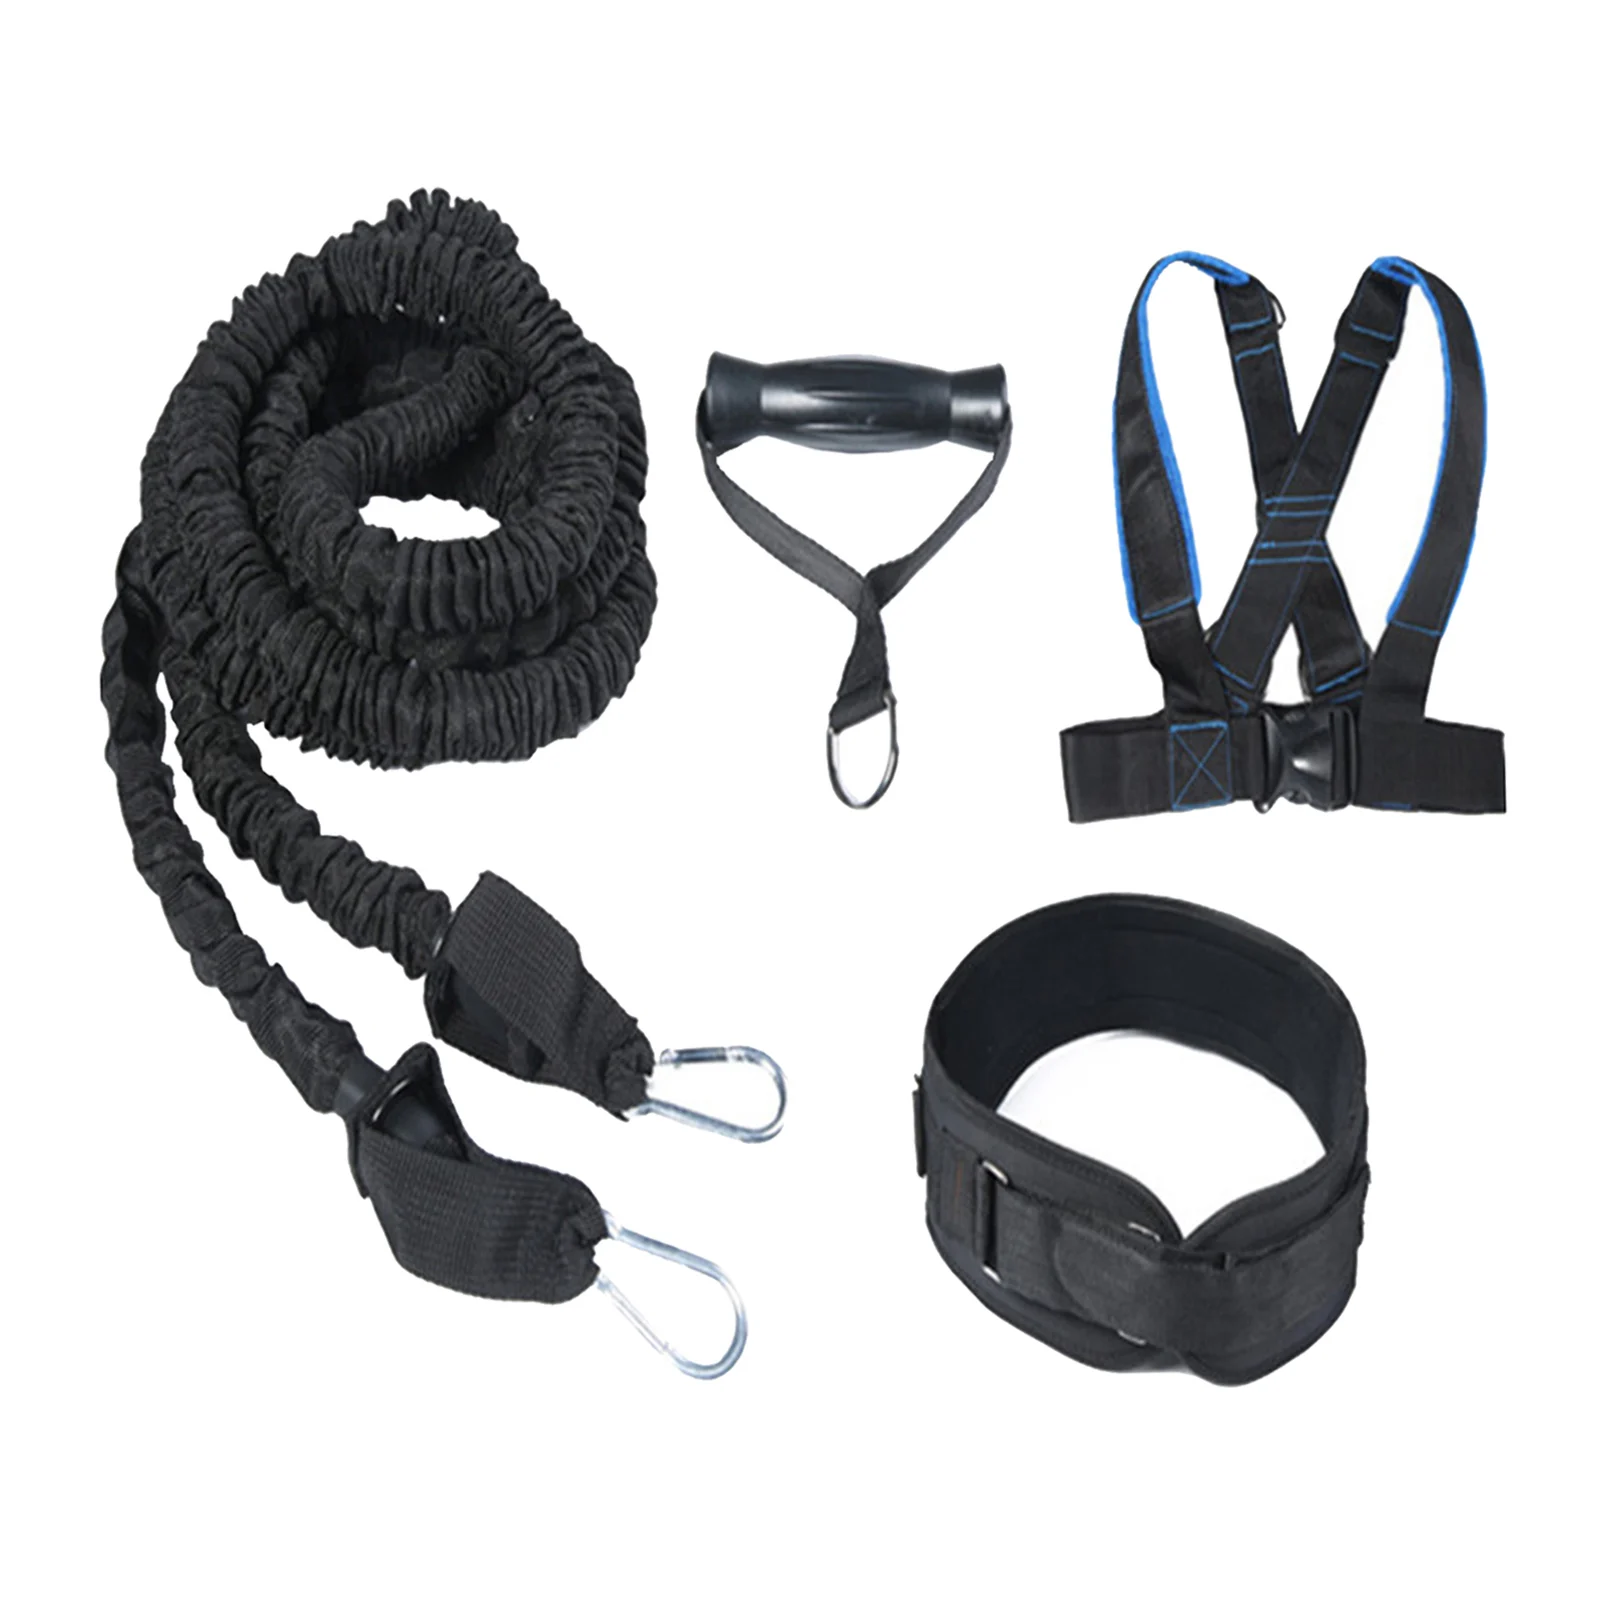 Training Resistance Band Set Strength Shoulder Strap Harness Vest Resistance Bungee Band Running Speed Football Bungee Training